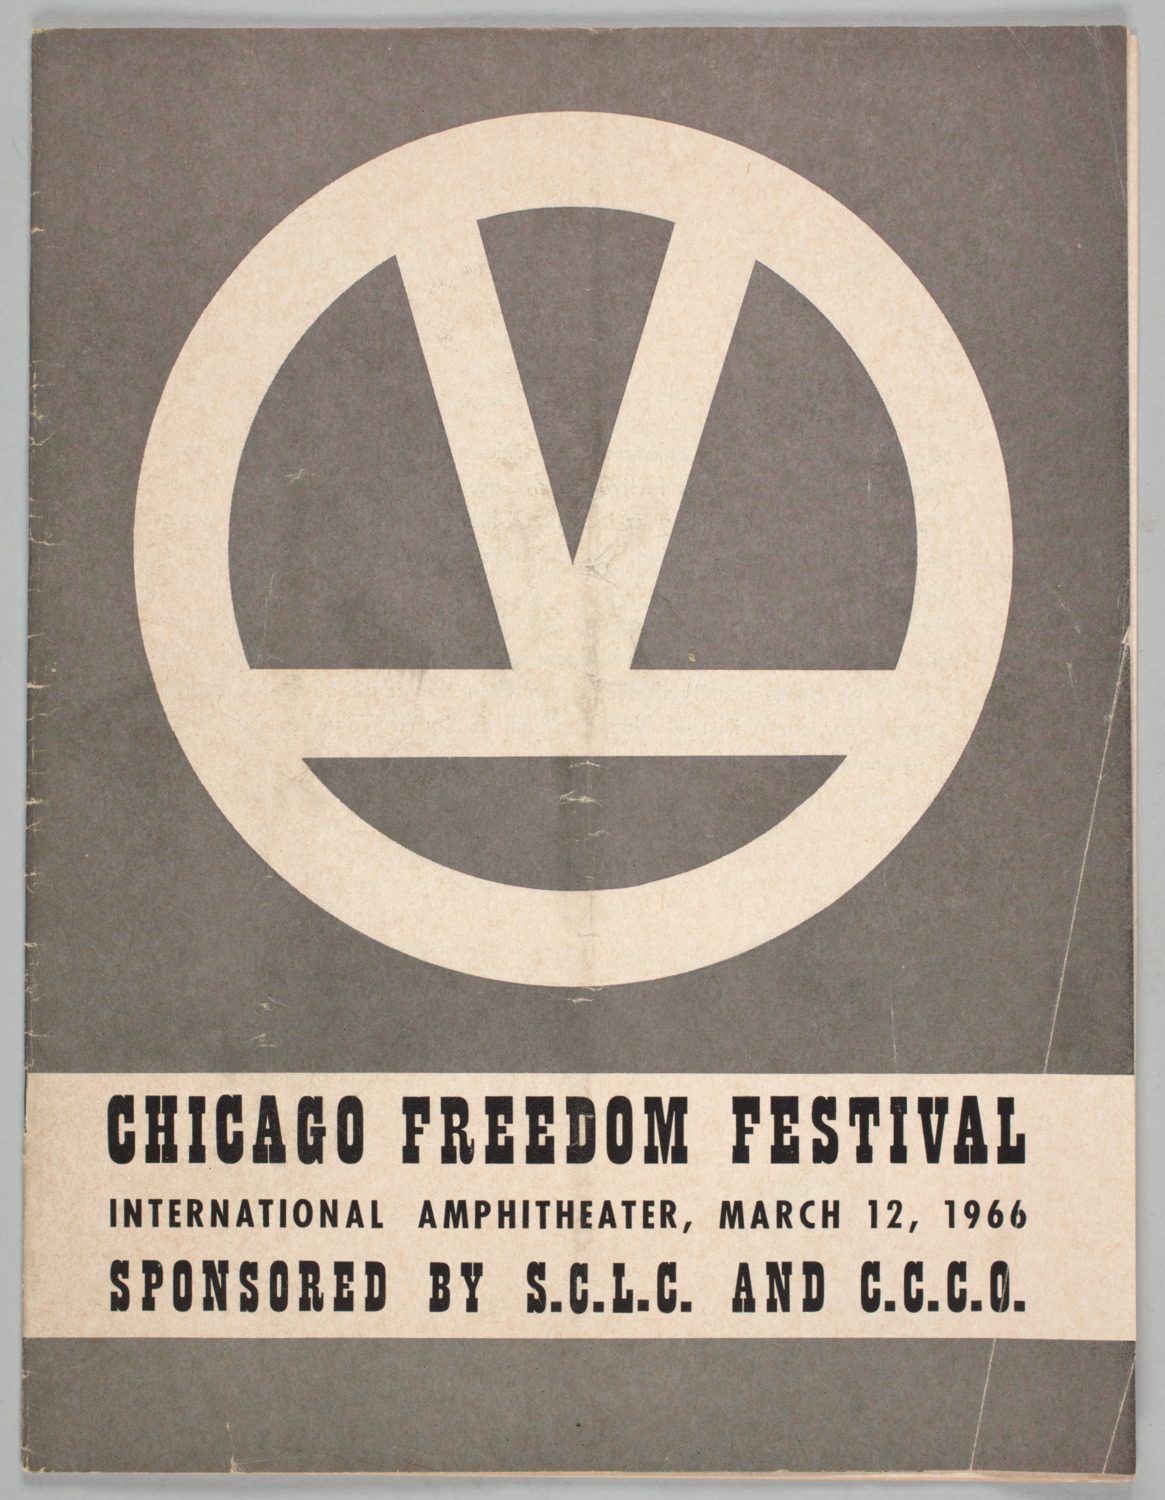 Chicago Freedom Festival program cover for March 12, 1966